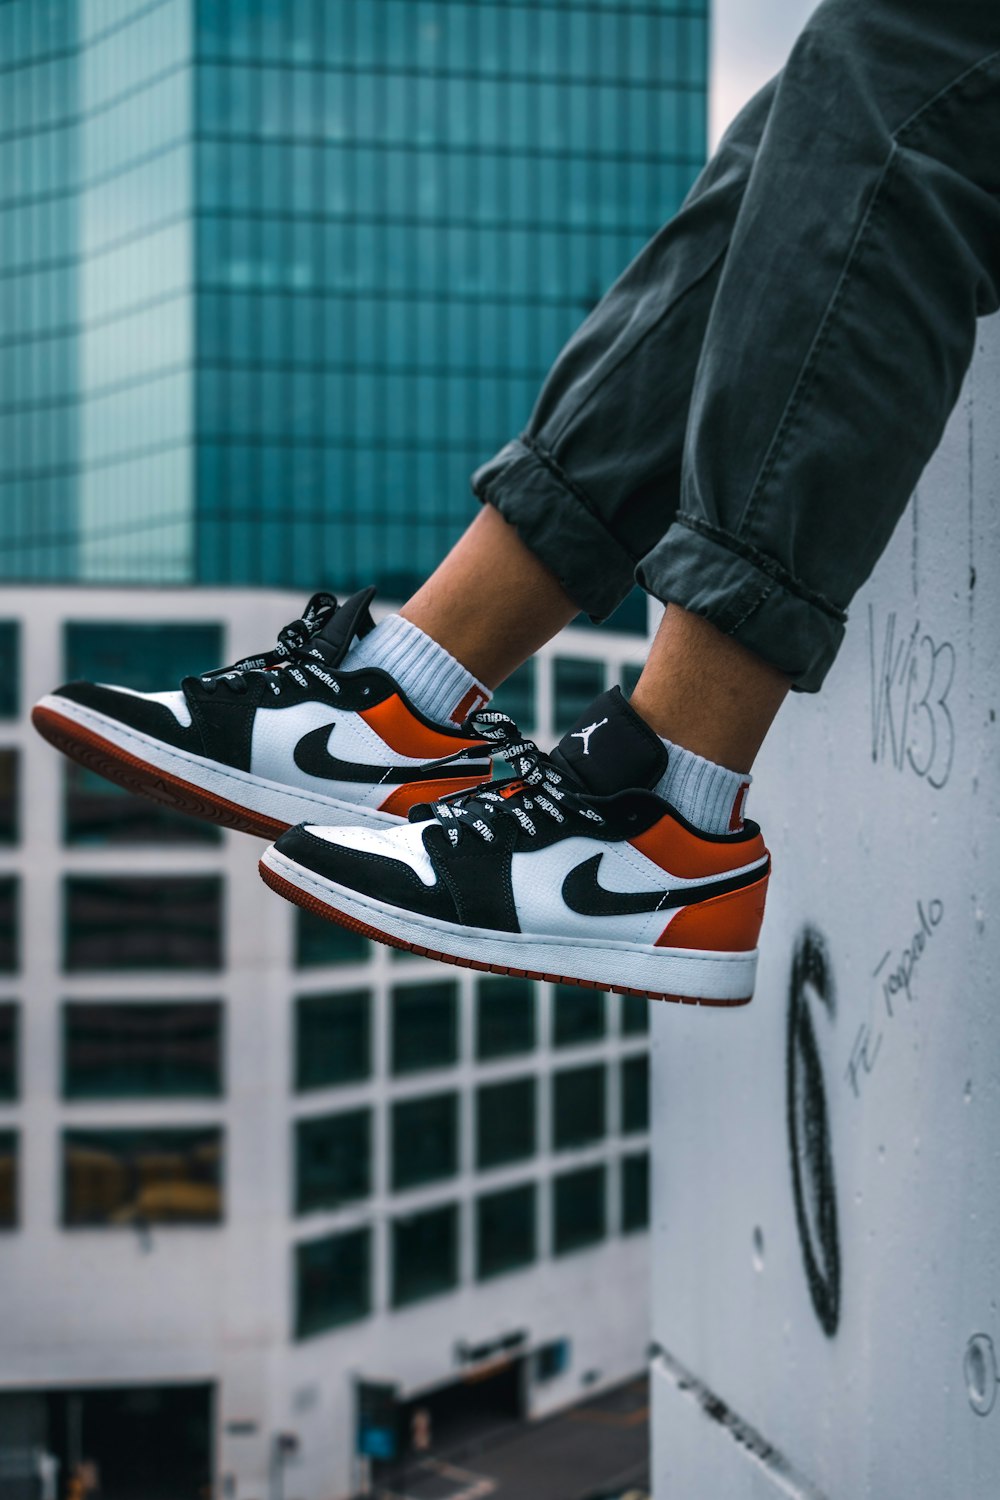 500+ Sneakers Pictures [HD] | Download Free Images on Unsplash